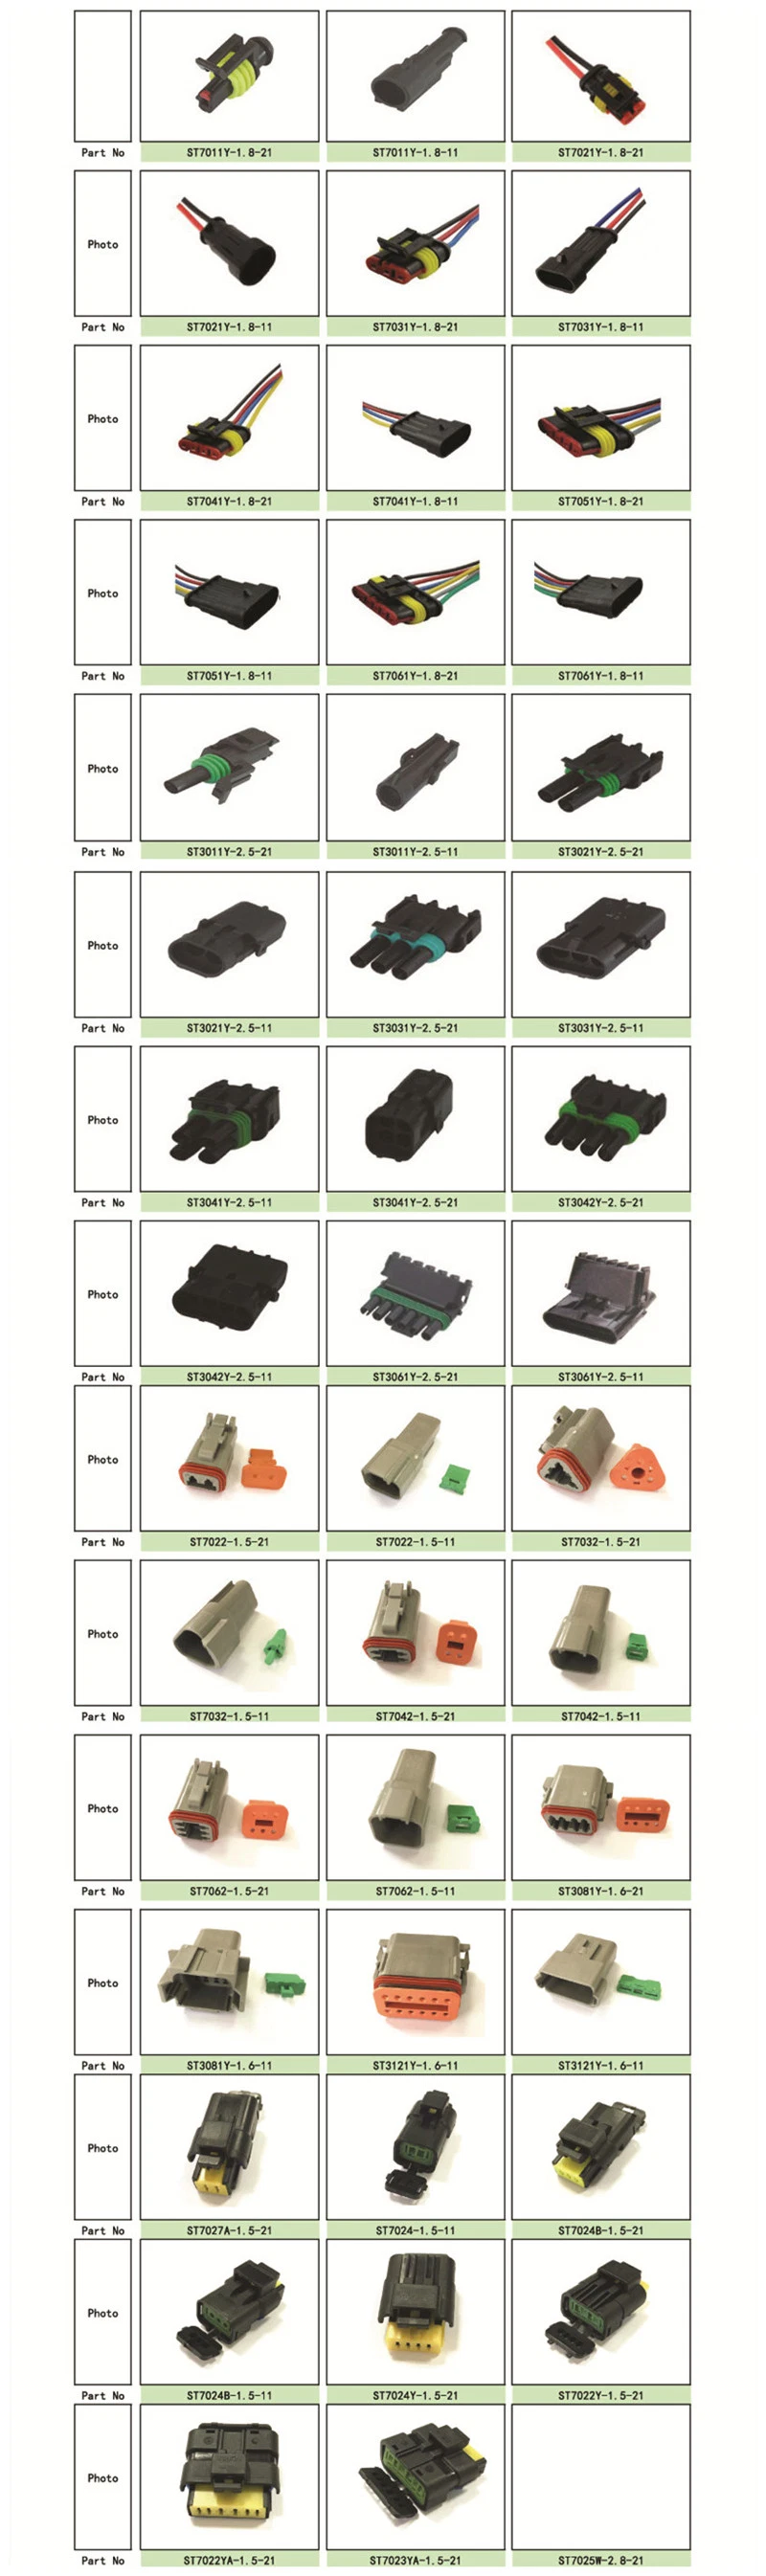 8 Pin Male Waterproof Electrical Automotive Connectors